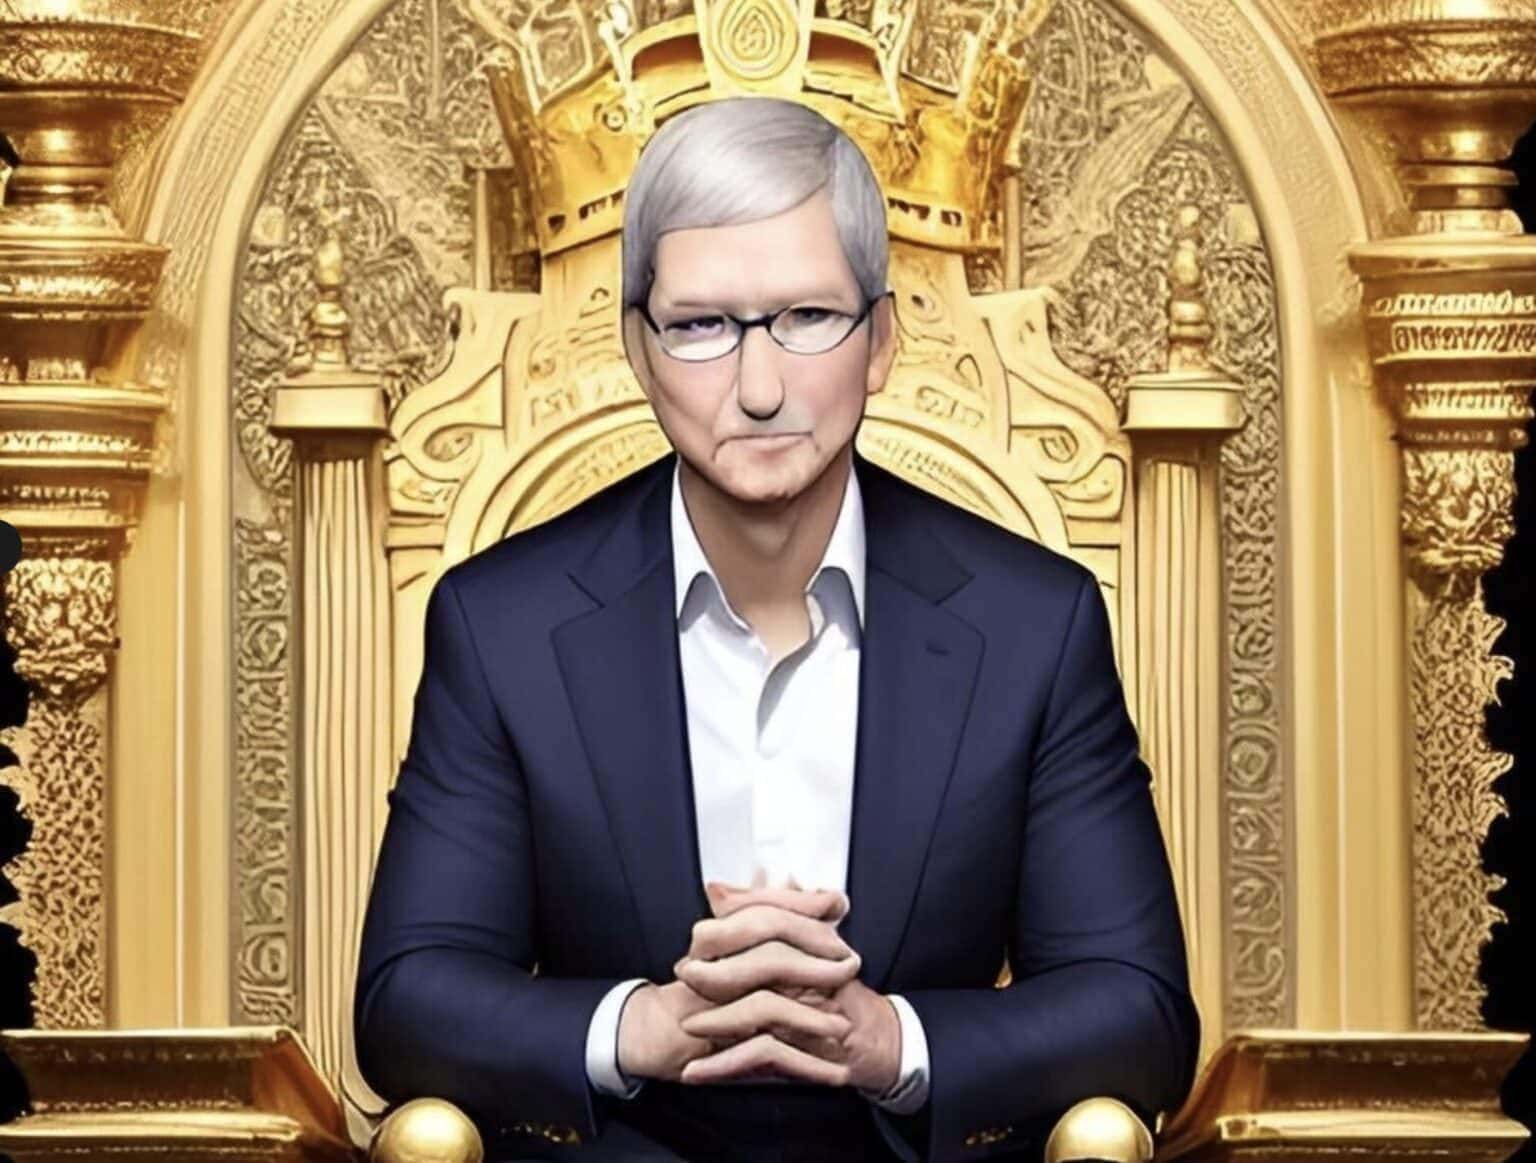 A survey ranked Tim Cook fourth most-popular CEO, according to employees.